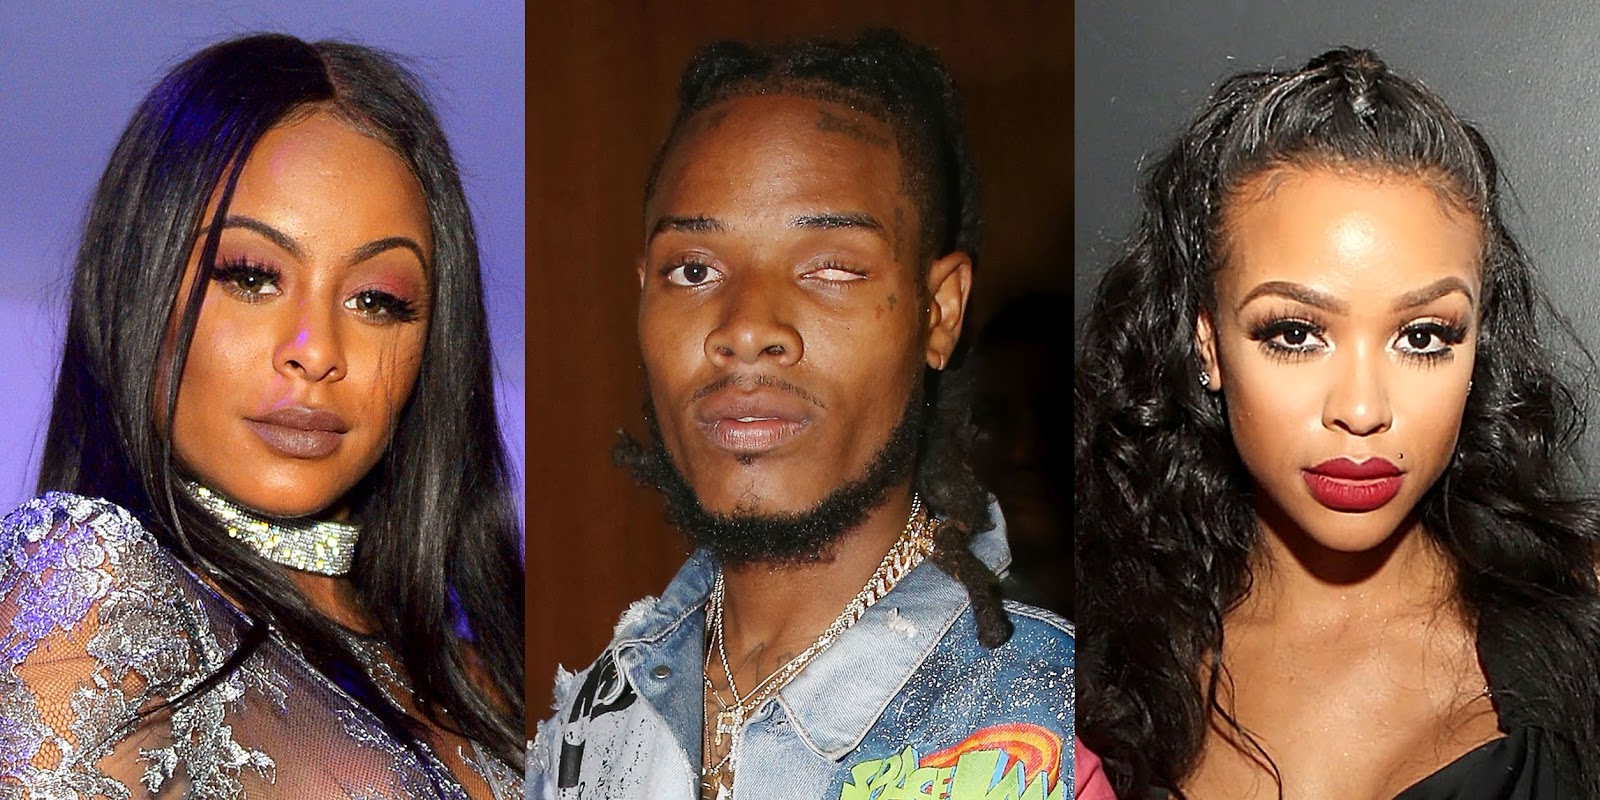 Alexis Sky is supposedly pregnant with Fetty Wap's baby, according to....